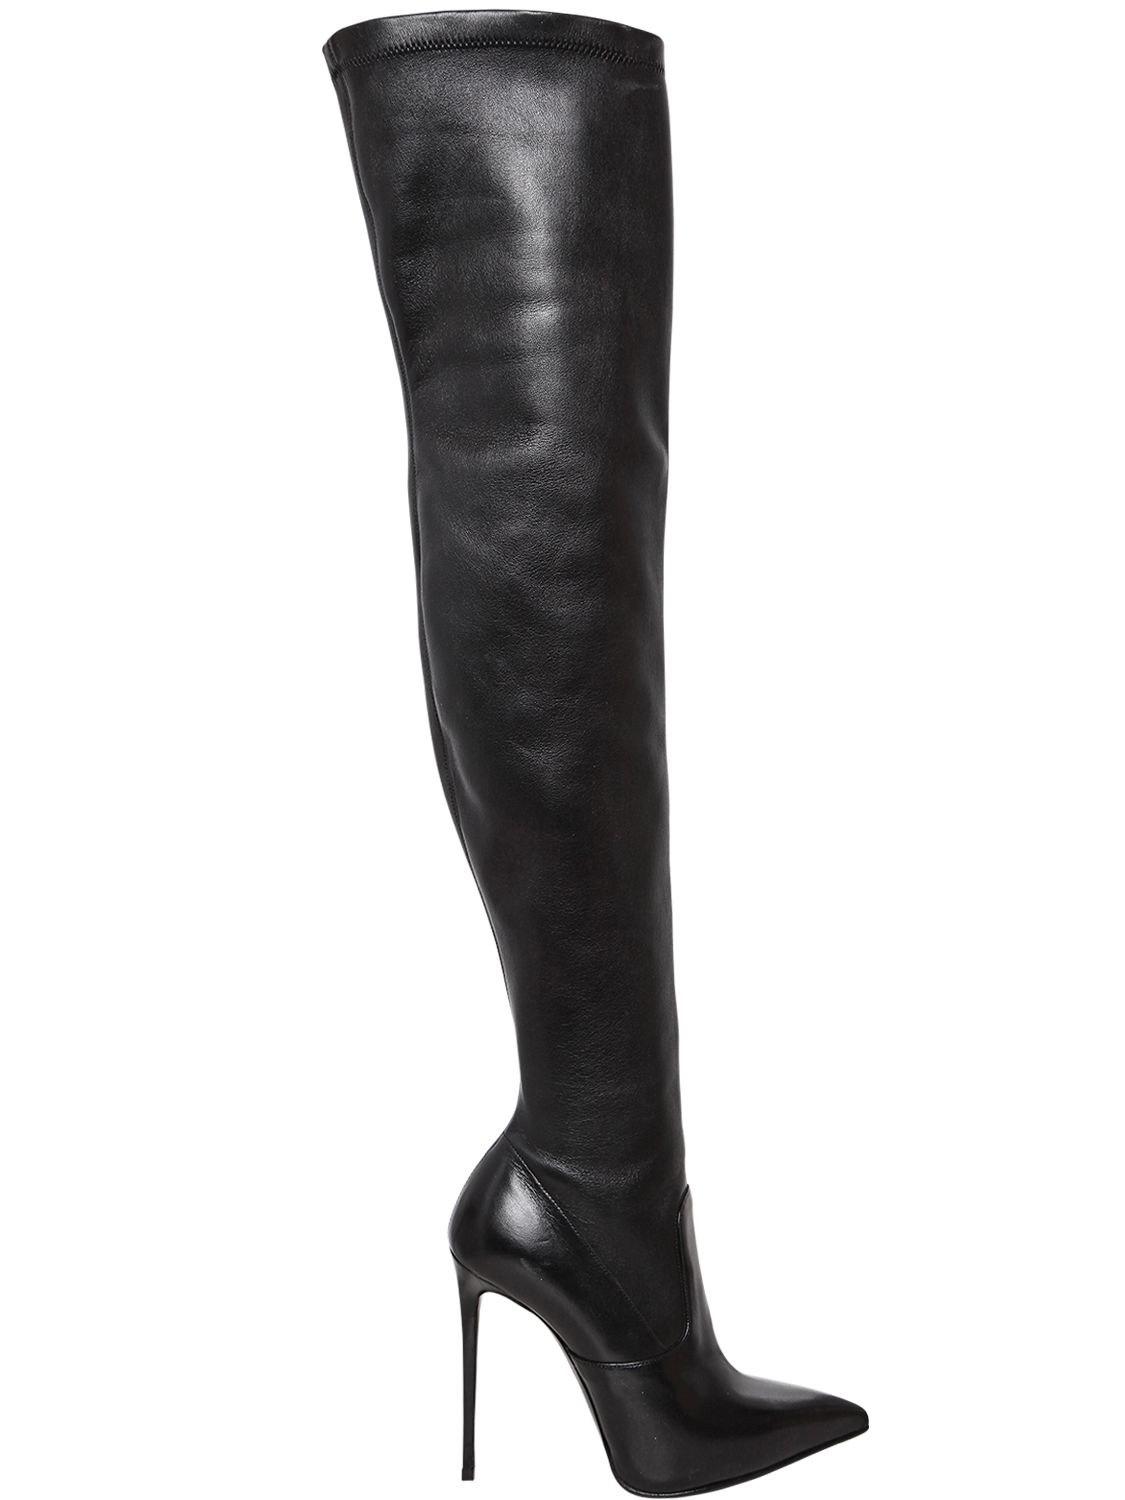 Le Silla 110mm Stretch Leather Boots in Black - Lyst